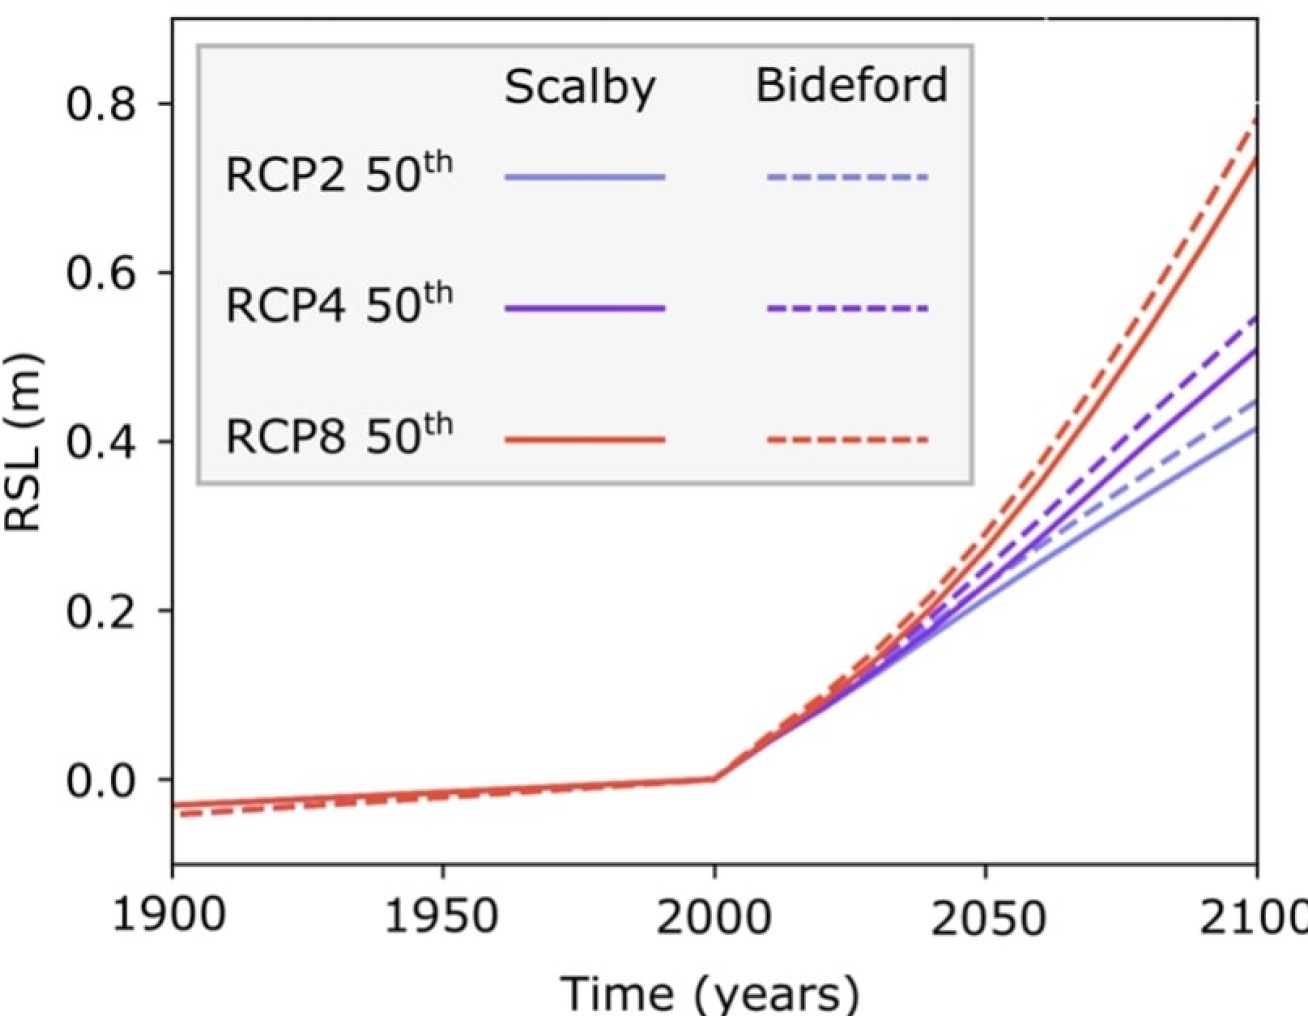 Relative sea level in past and future for the years 1900 – 2100 for Bideford (dashed line) and Scalby (solid line). 